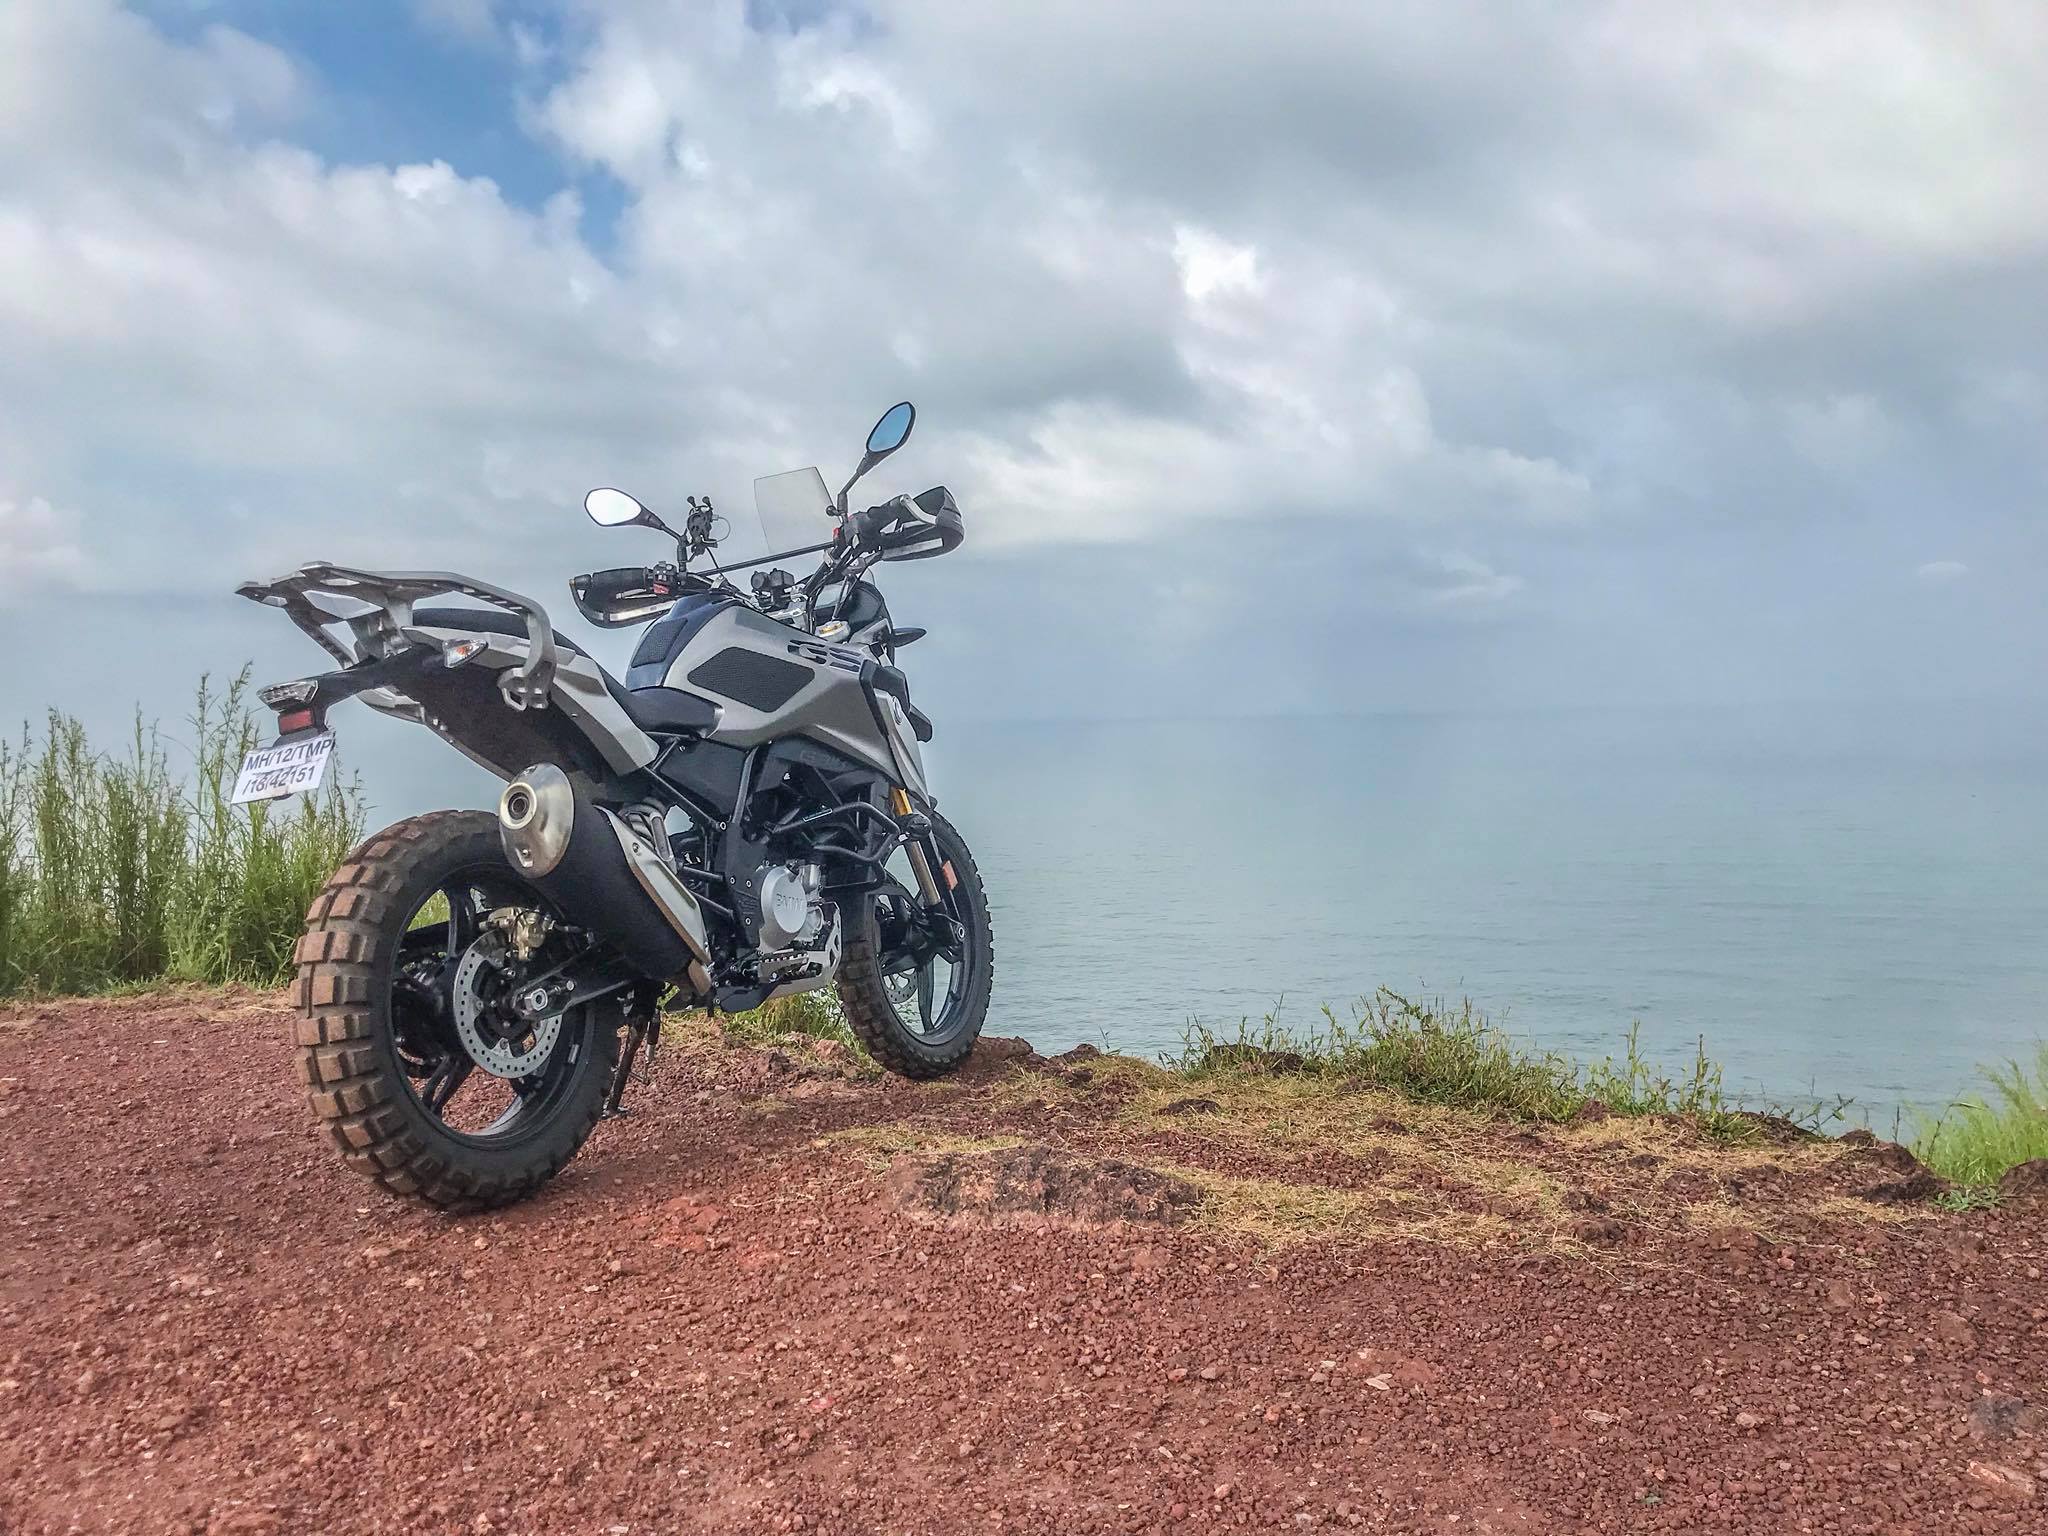 BMW G310 GS Off Road Capability